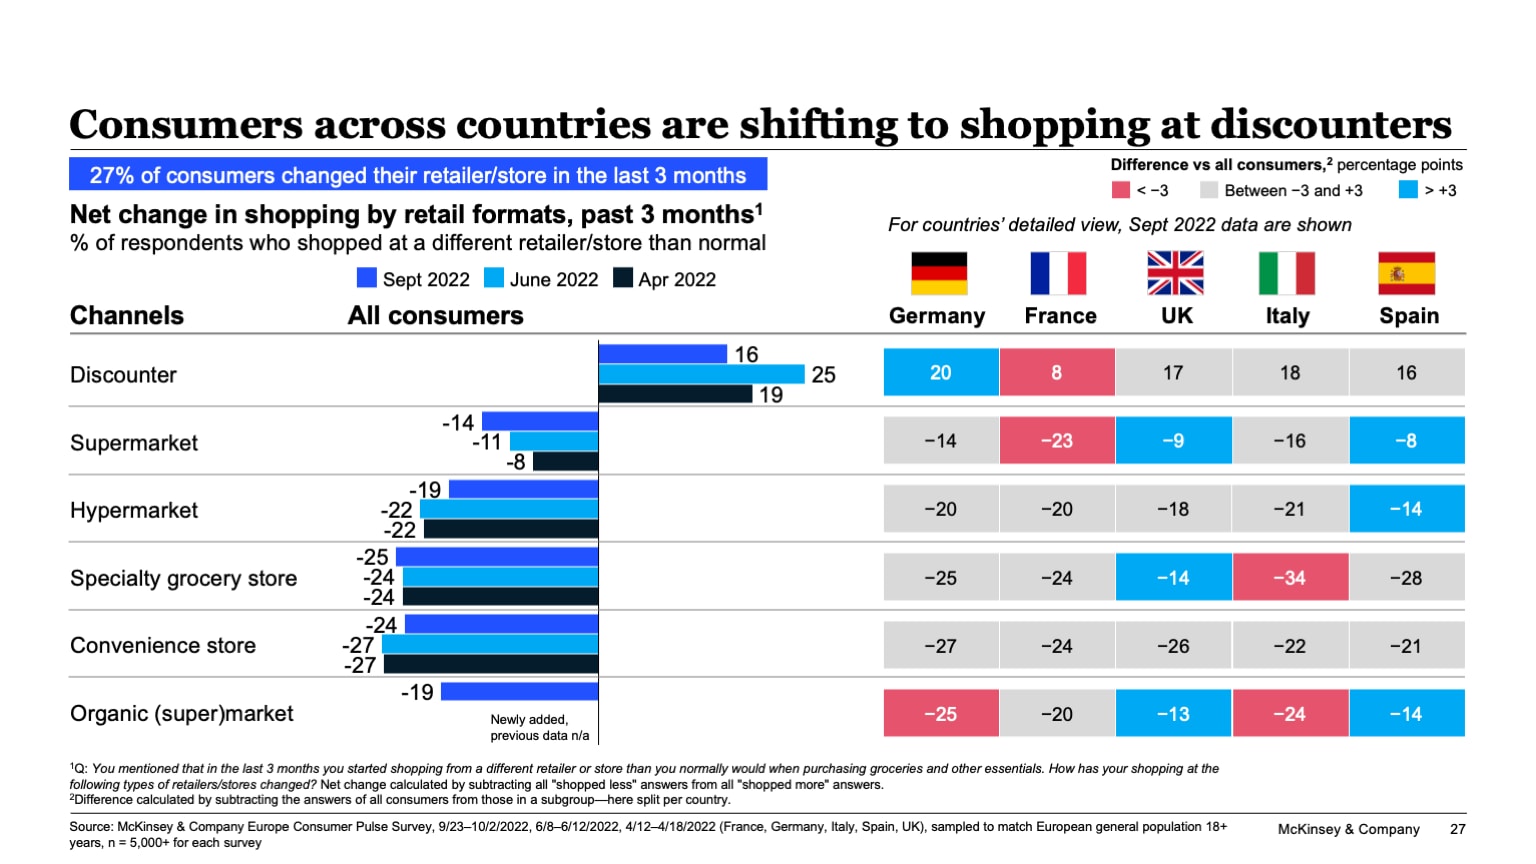 Consumers across countries are shifting to shopping at discounters